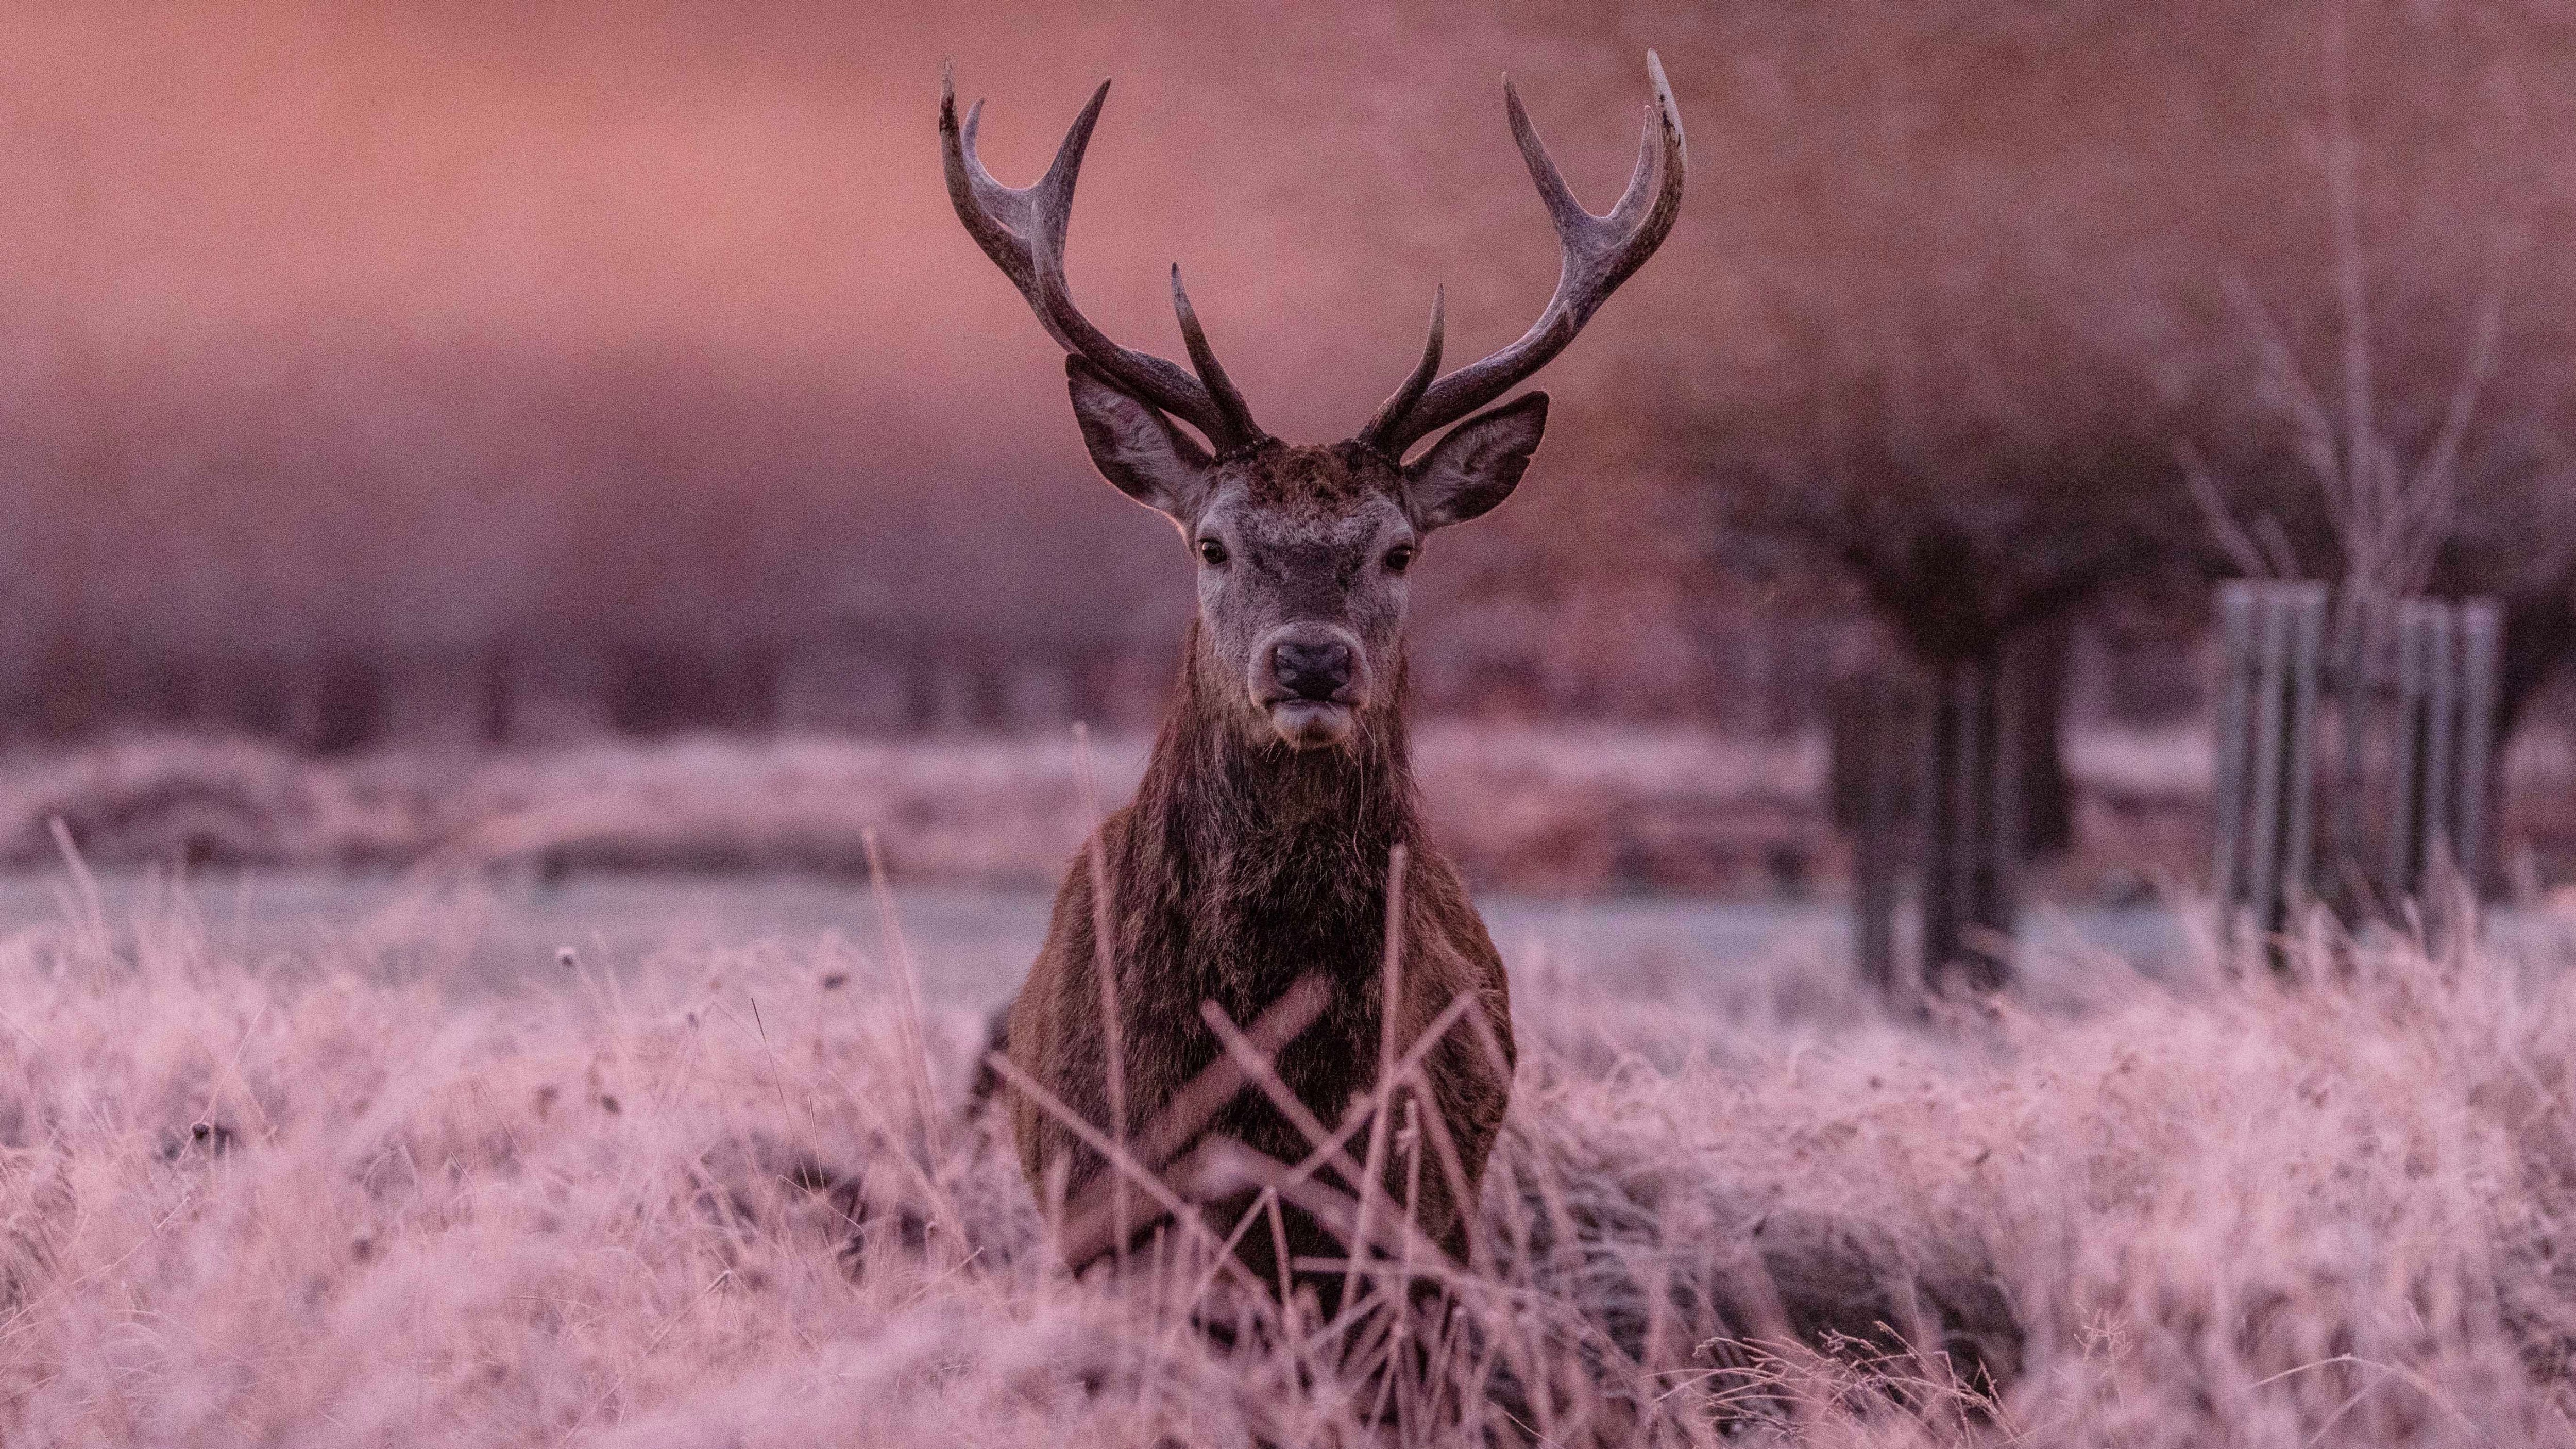 The number of wild deer across Scotland is estimated to have doubled in the past 30 years